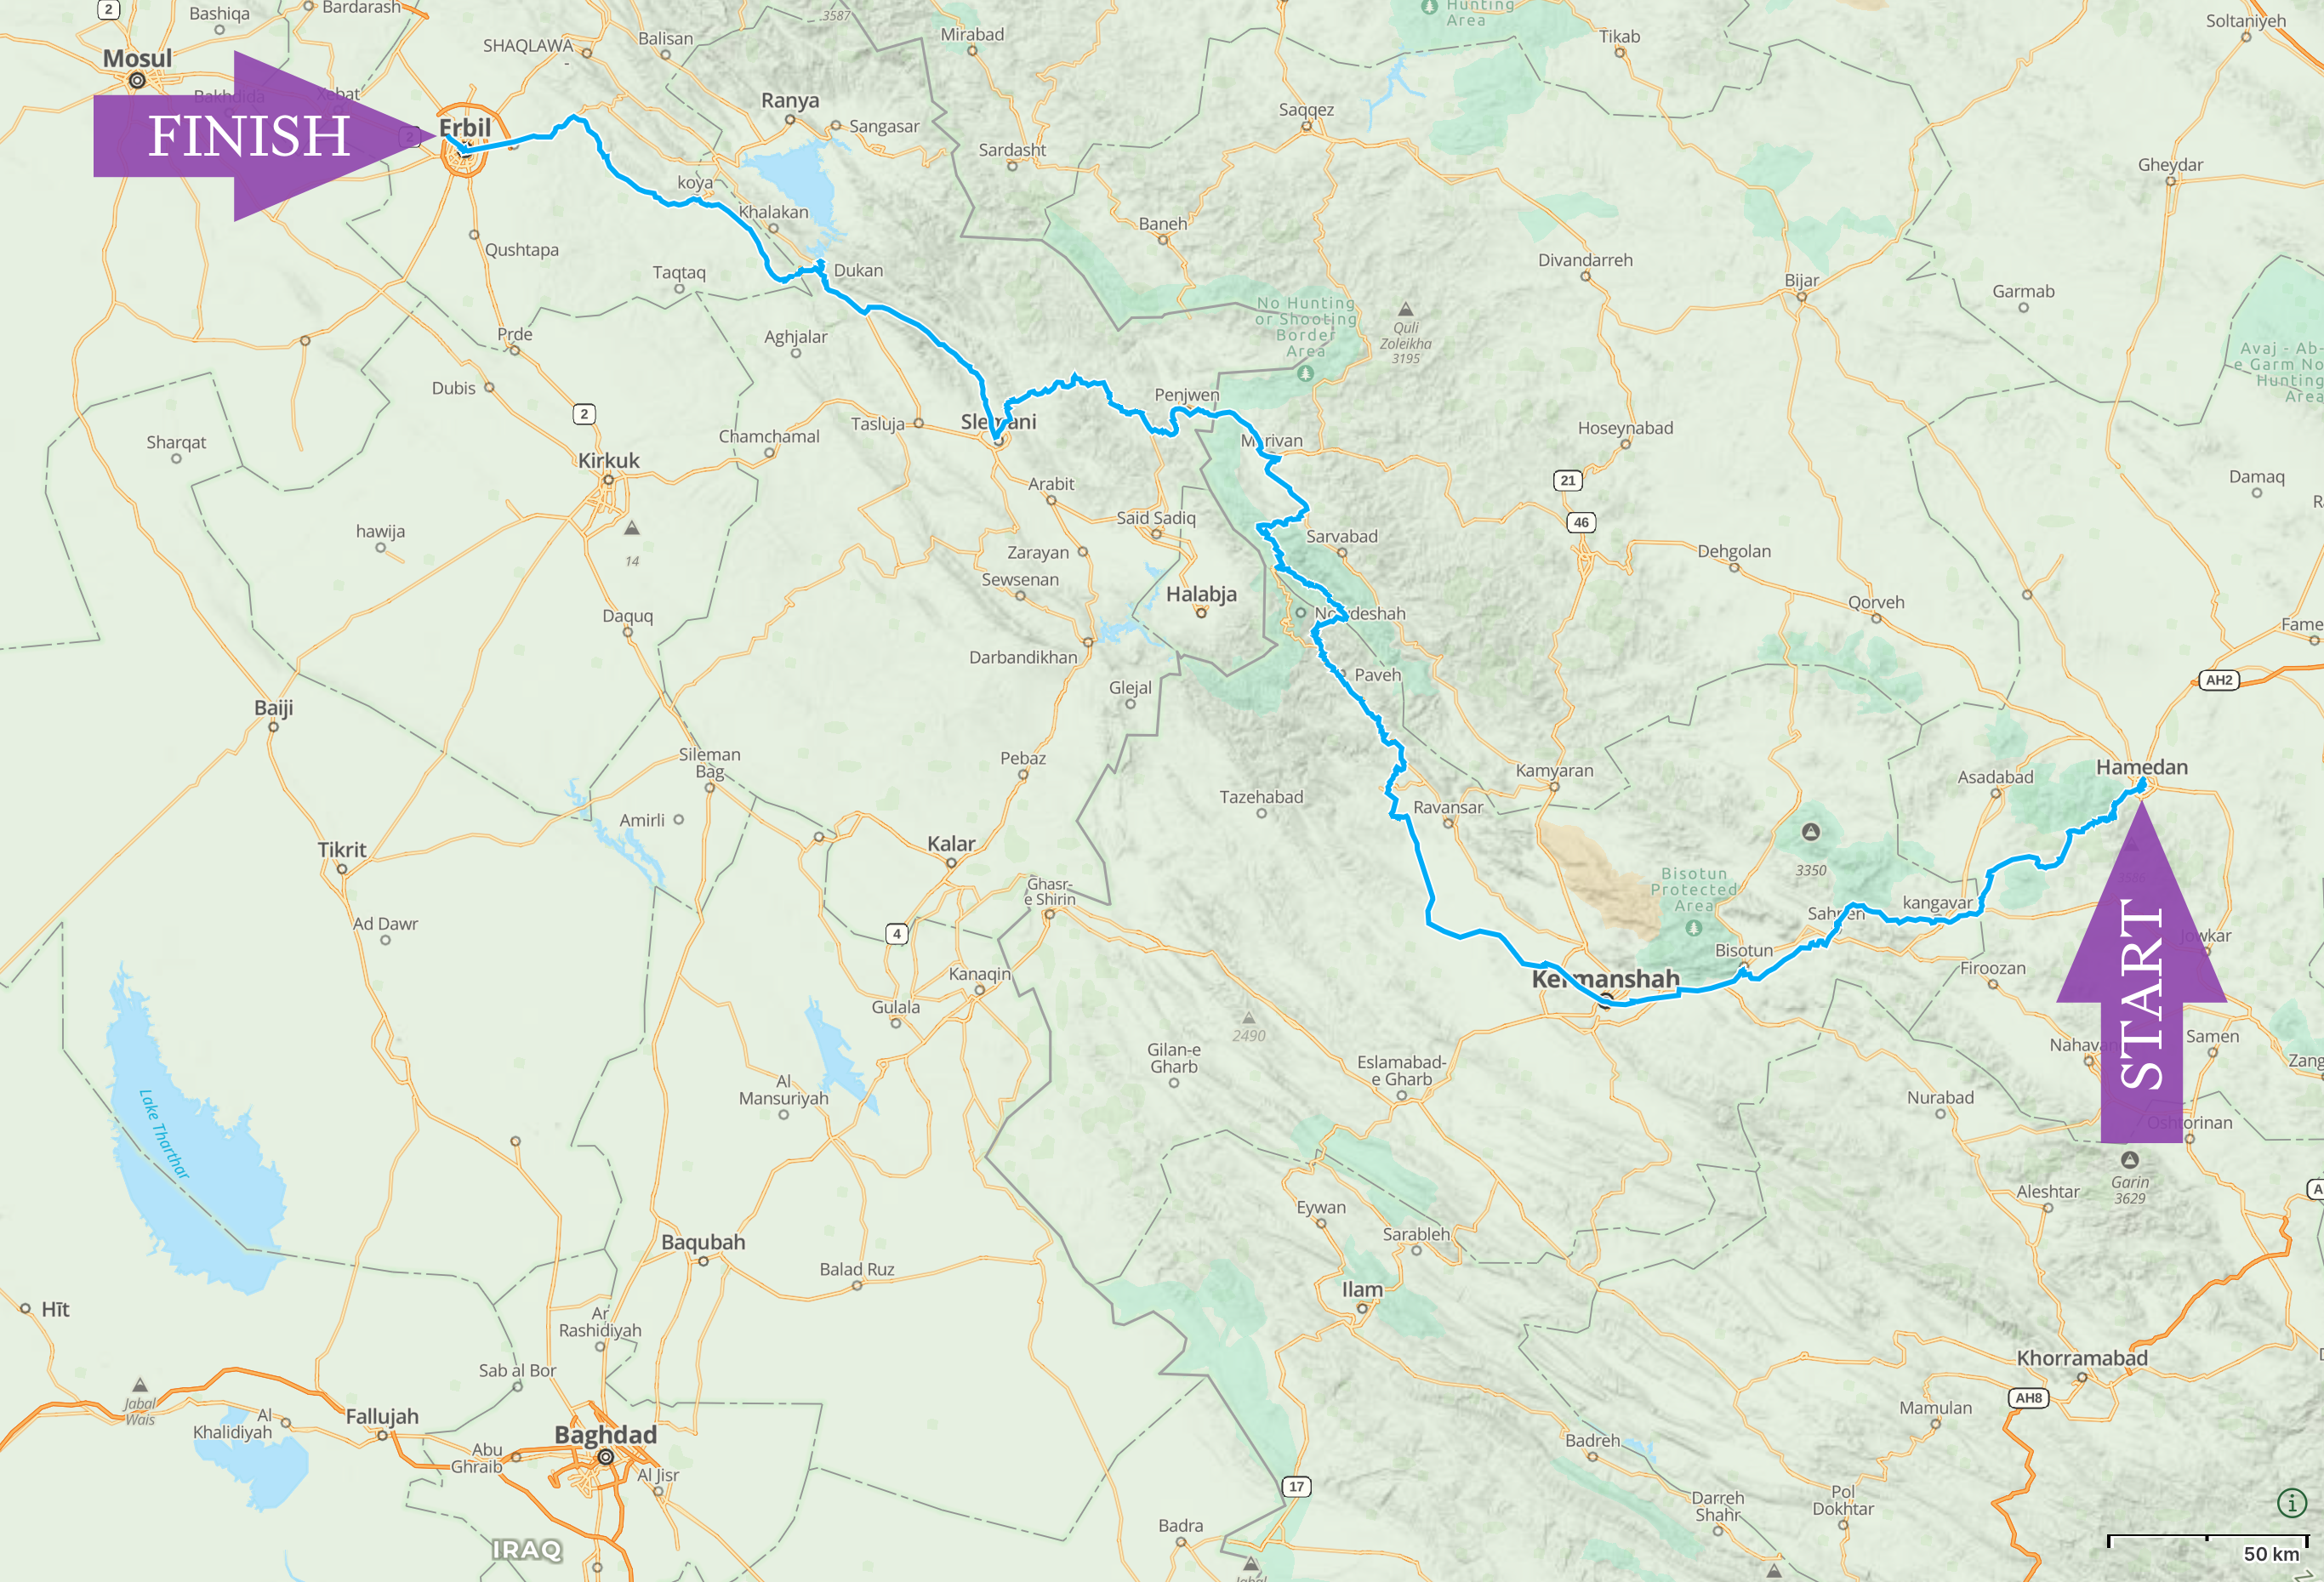 Map of Kurdistan with the route I walked in 2016 highlighted.